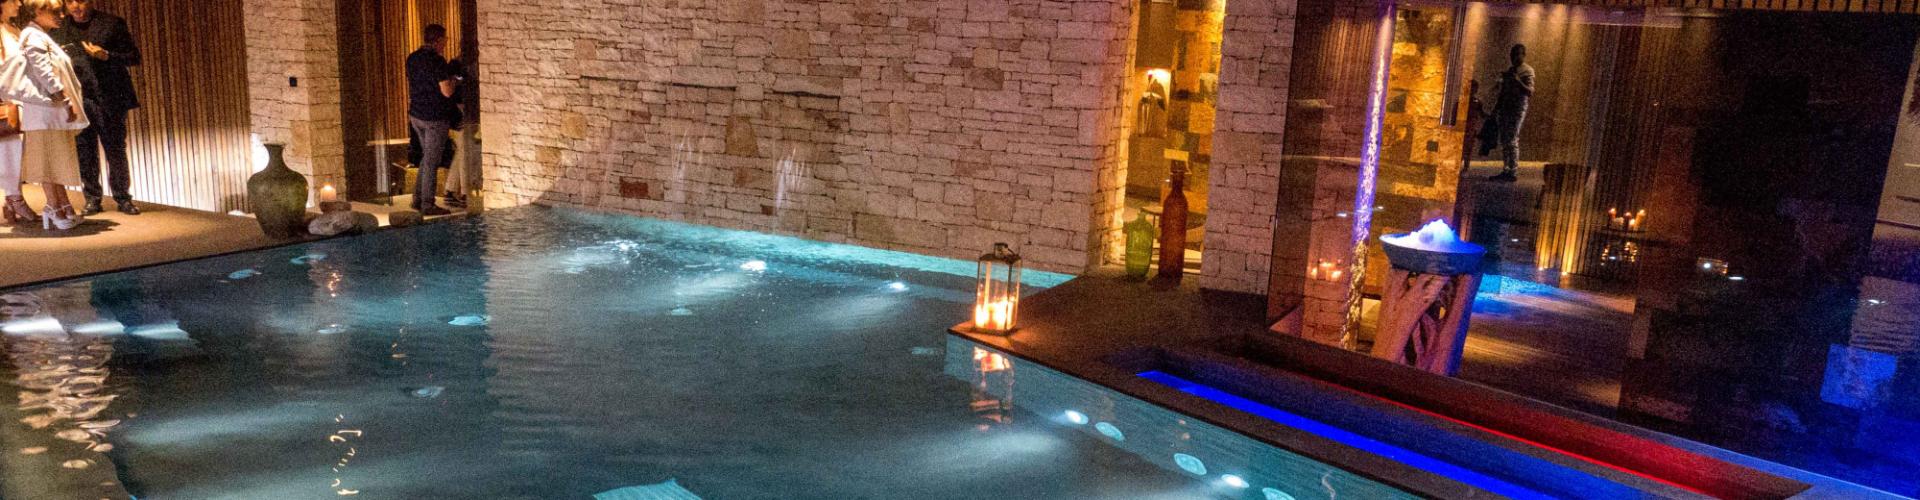 For Christmas, give wellness: entry to the spa, beauty treatments, massages in San Giovanni Rotondo